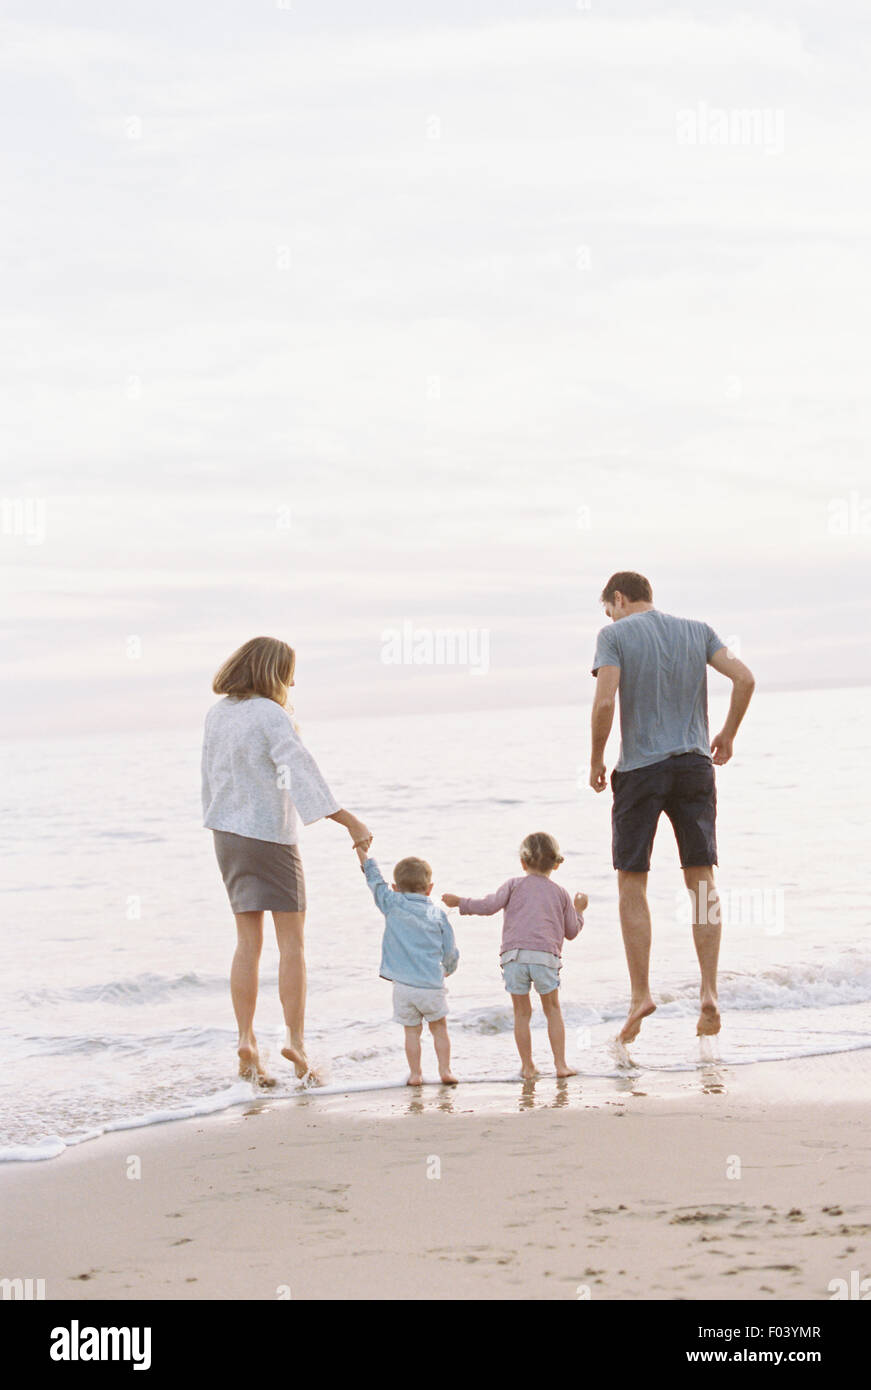 Couple playing with their son and daughter on a sandy beach by the ocean, holding hands. Stock Photo